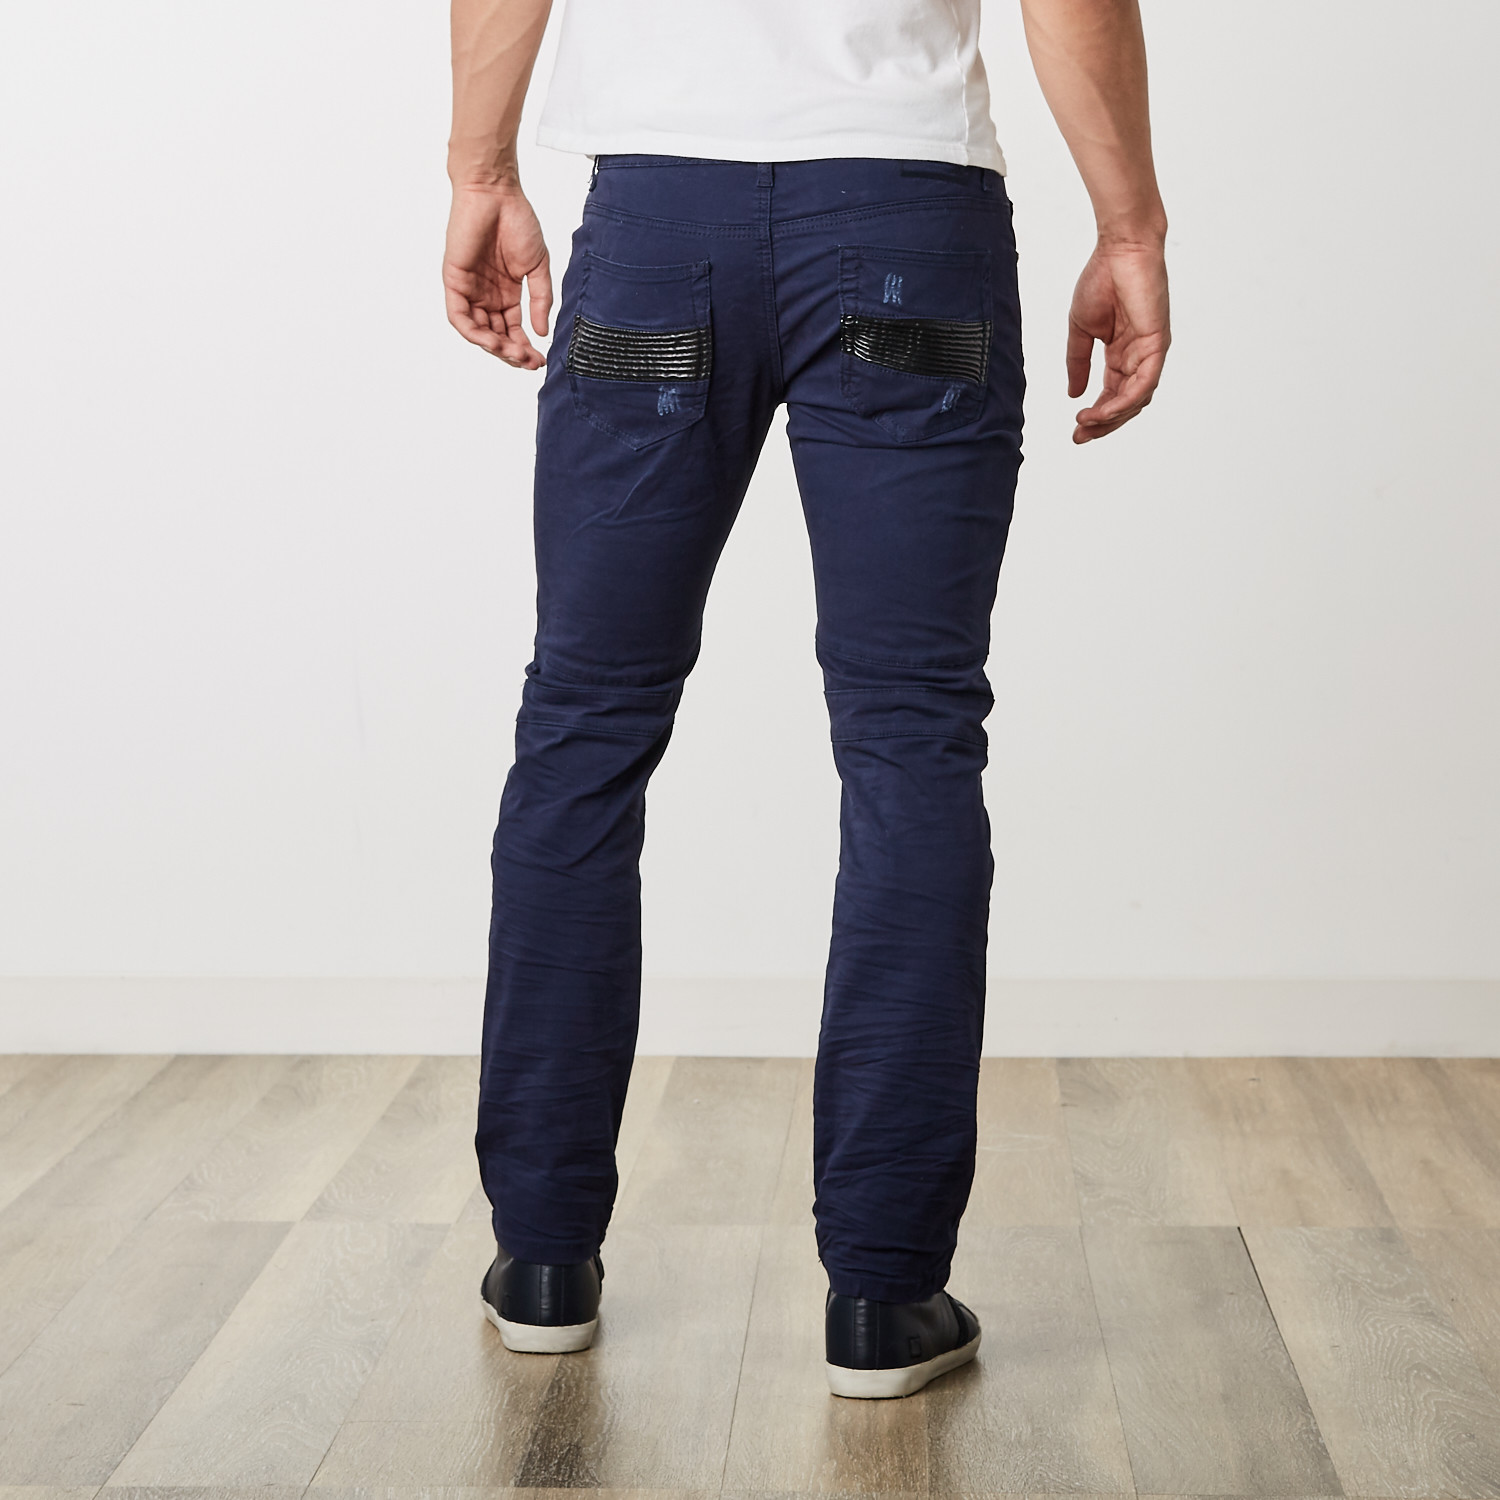 Ripped Leather Trim Jeans // Navy (32WX32L) - Xray Jeans - Touch of Modern